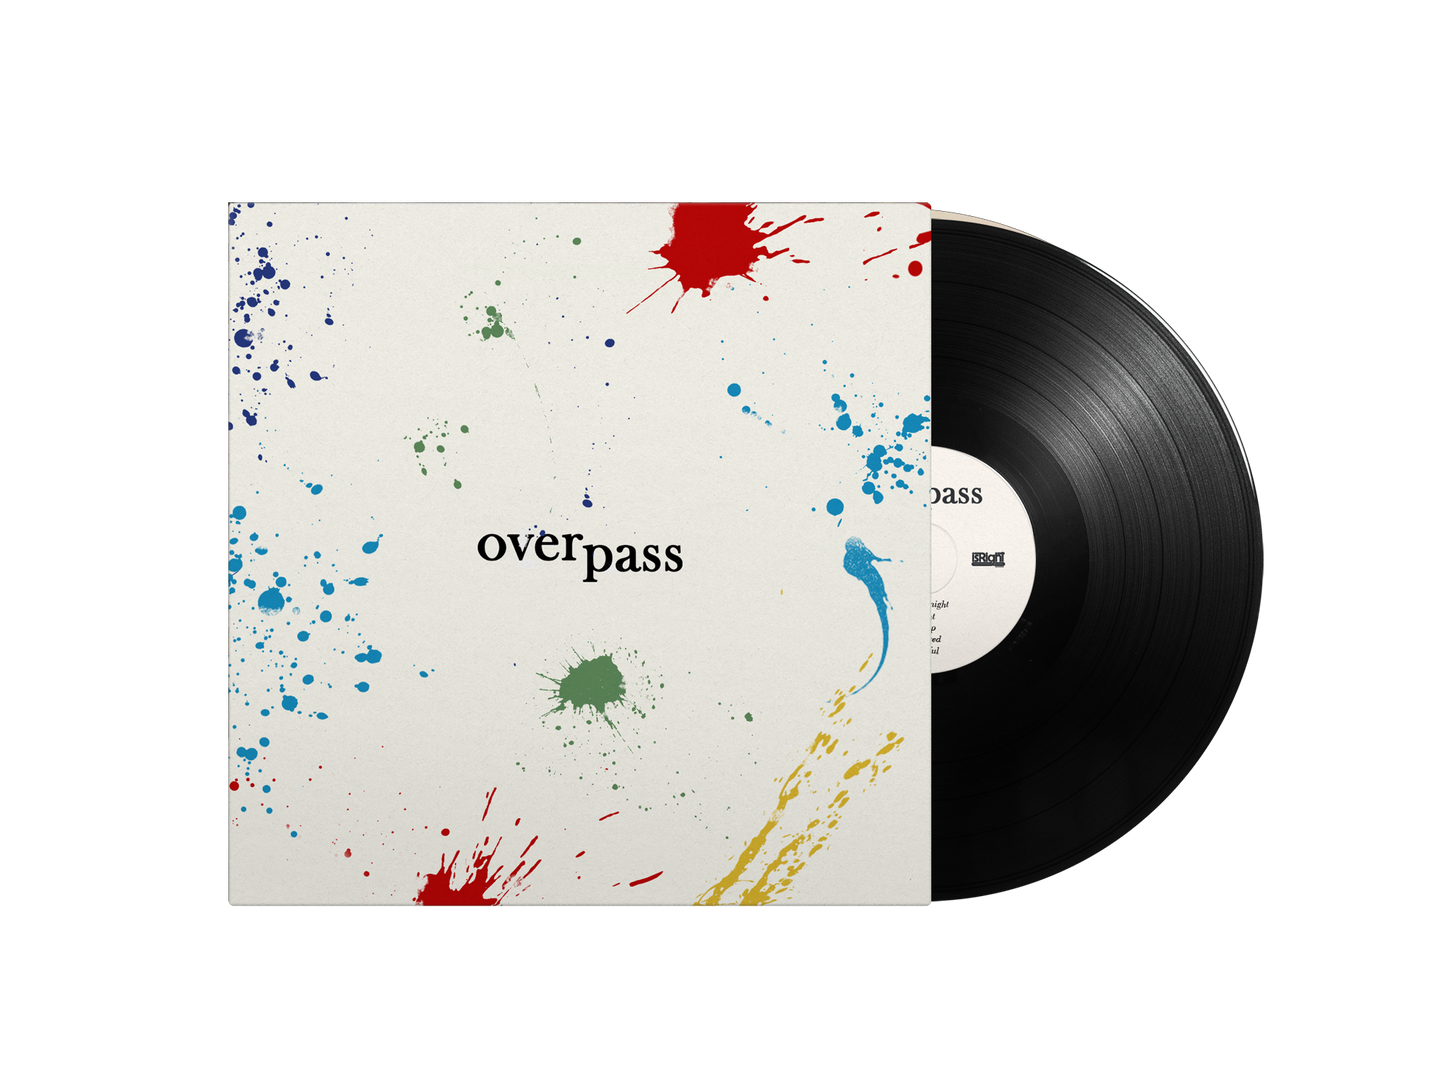 overpass - 'From the Night'  Black Vinyl (Ltd Edition Hand Painted Sleeve)